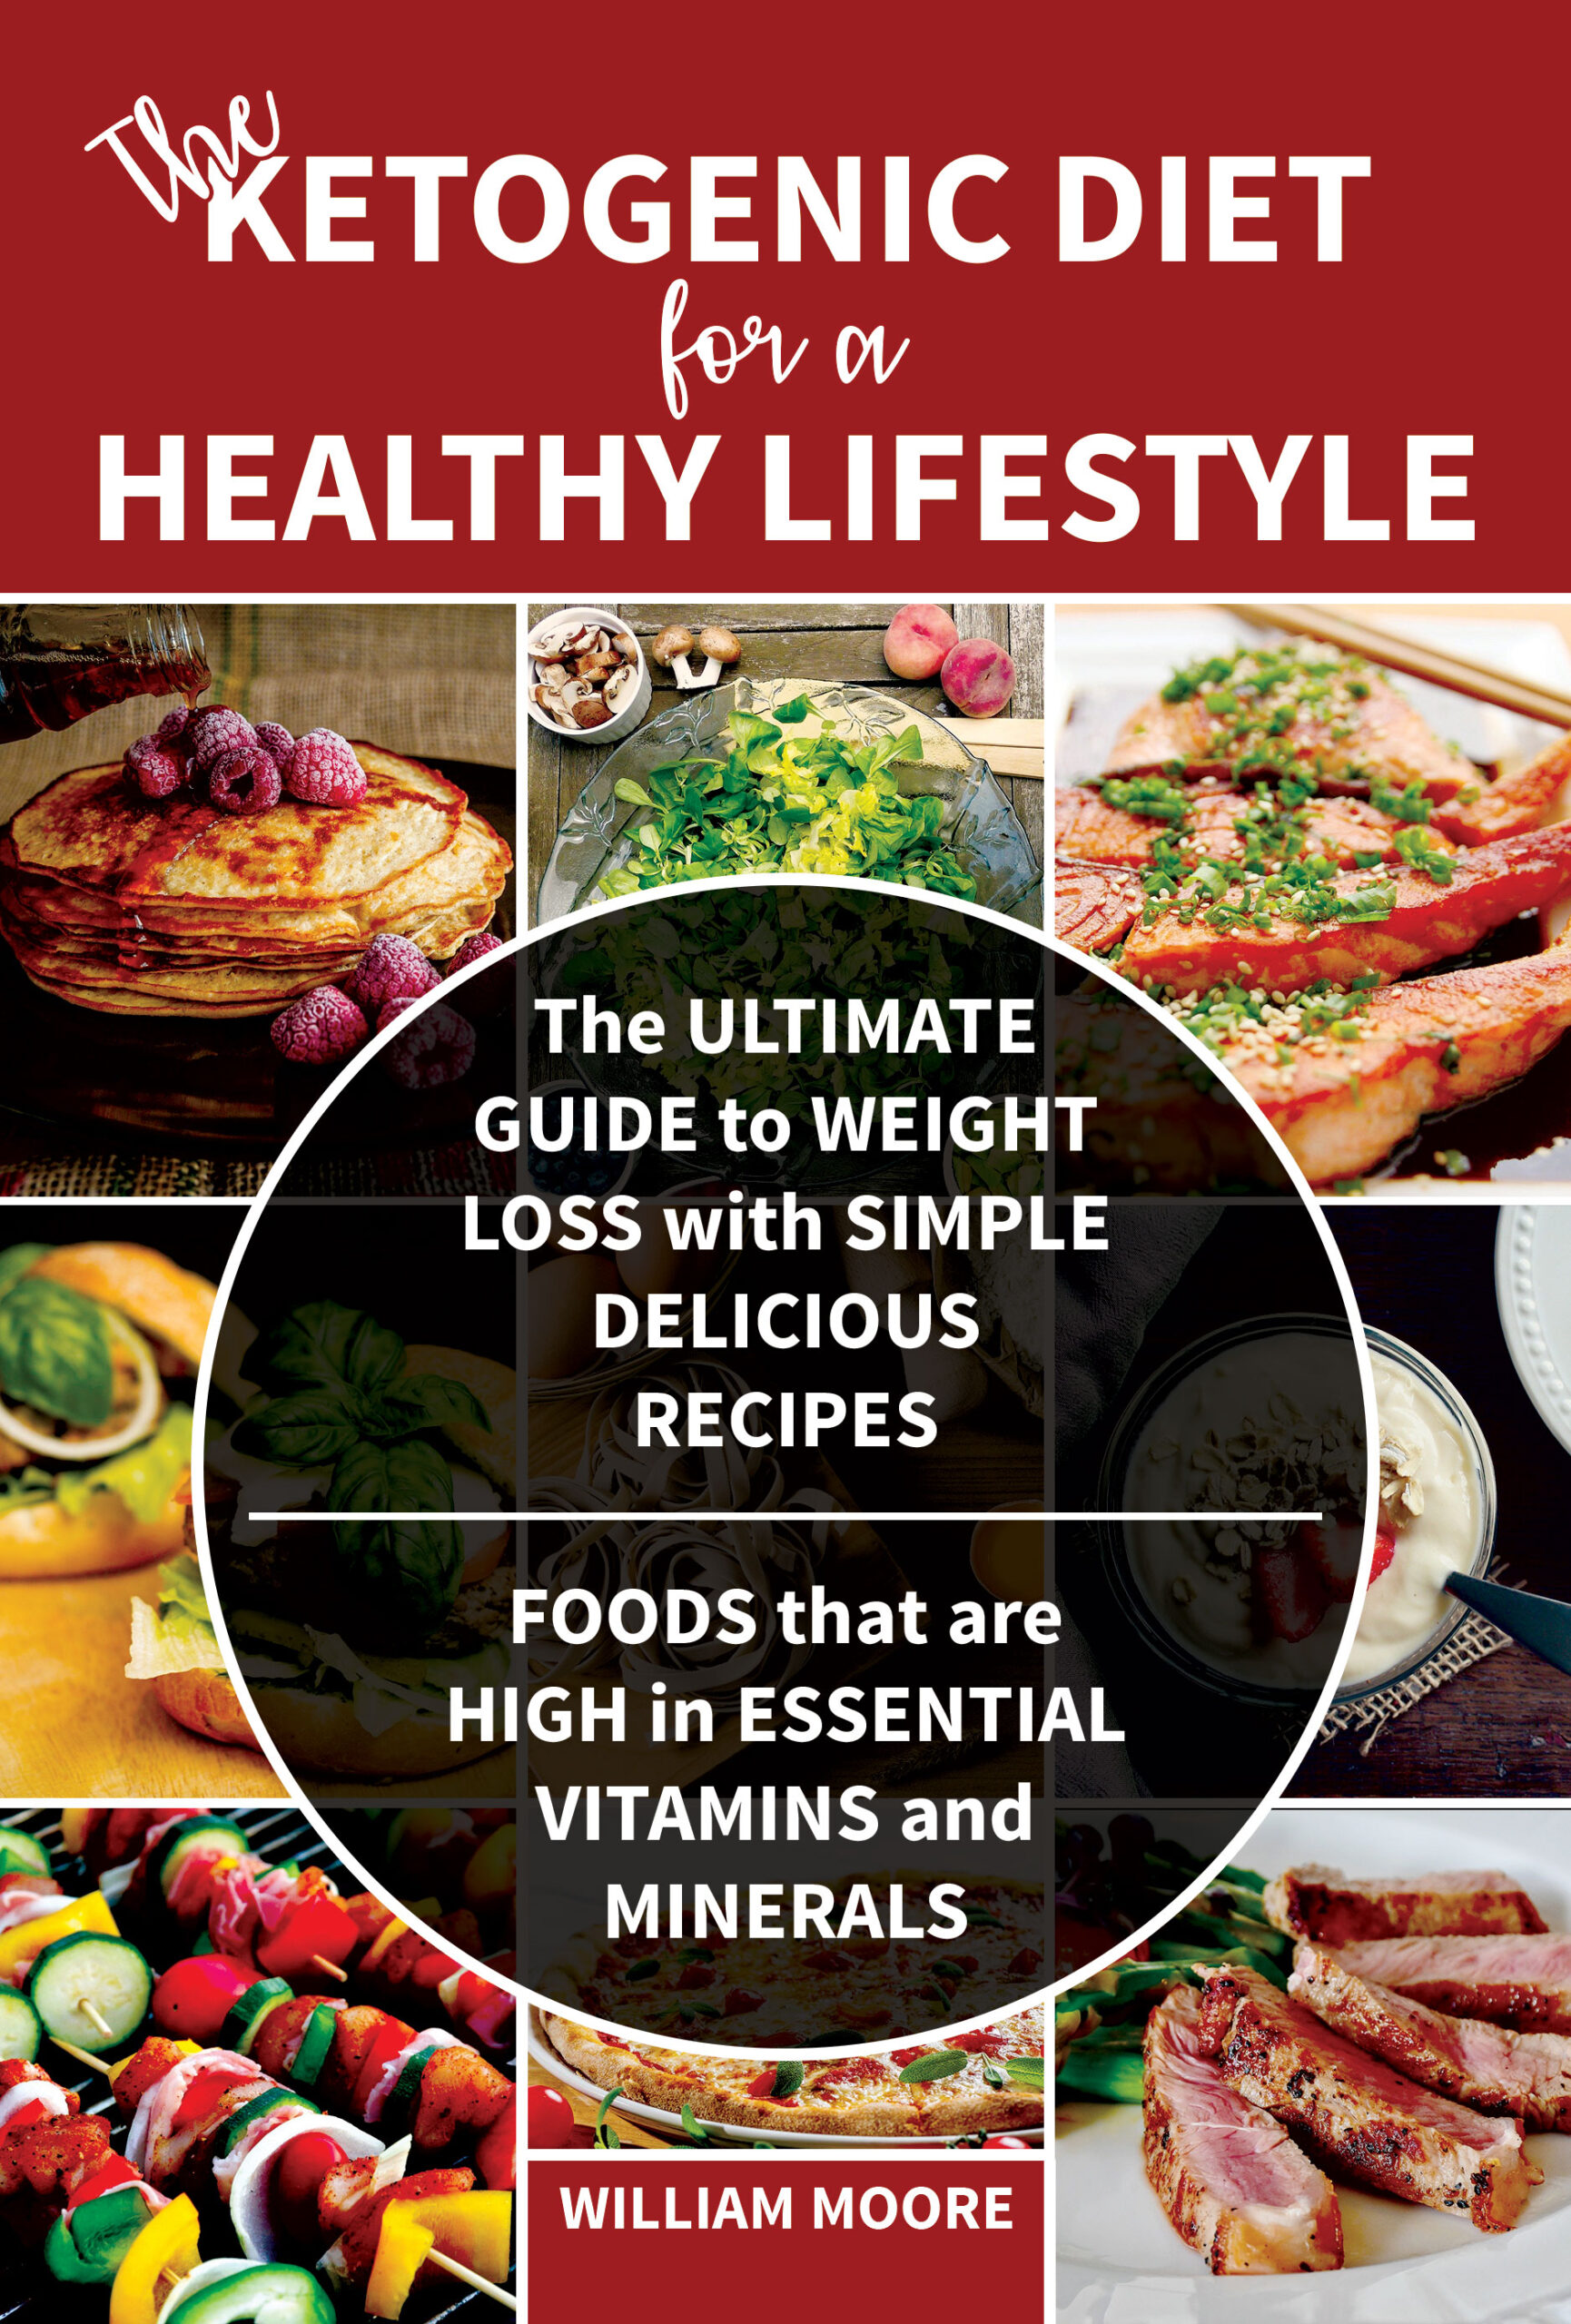 FREE: The Ketogenic Diet for a Healthy Lifestyle by William Moore